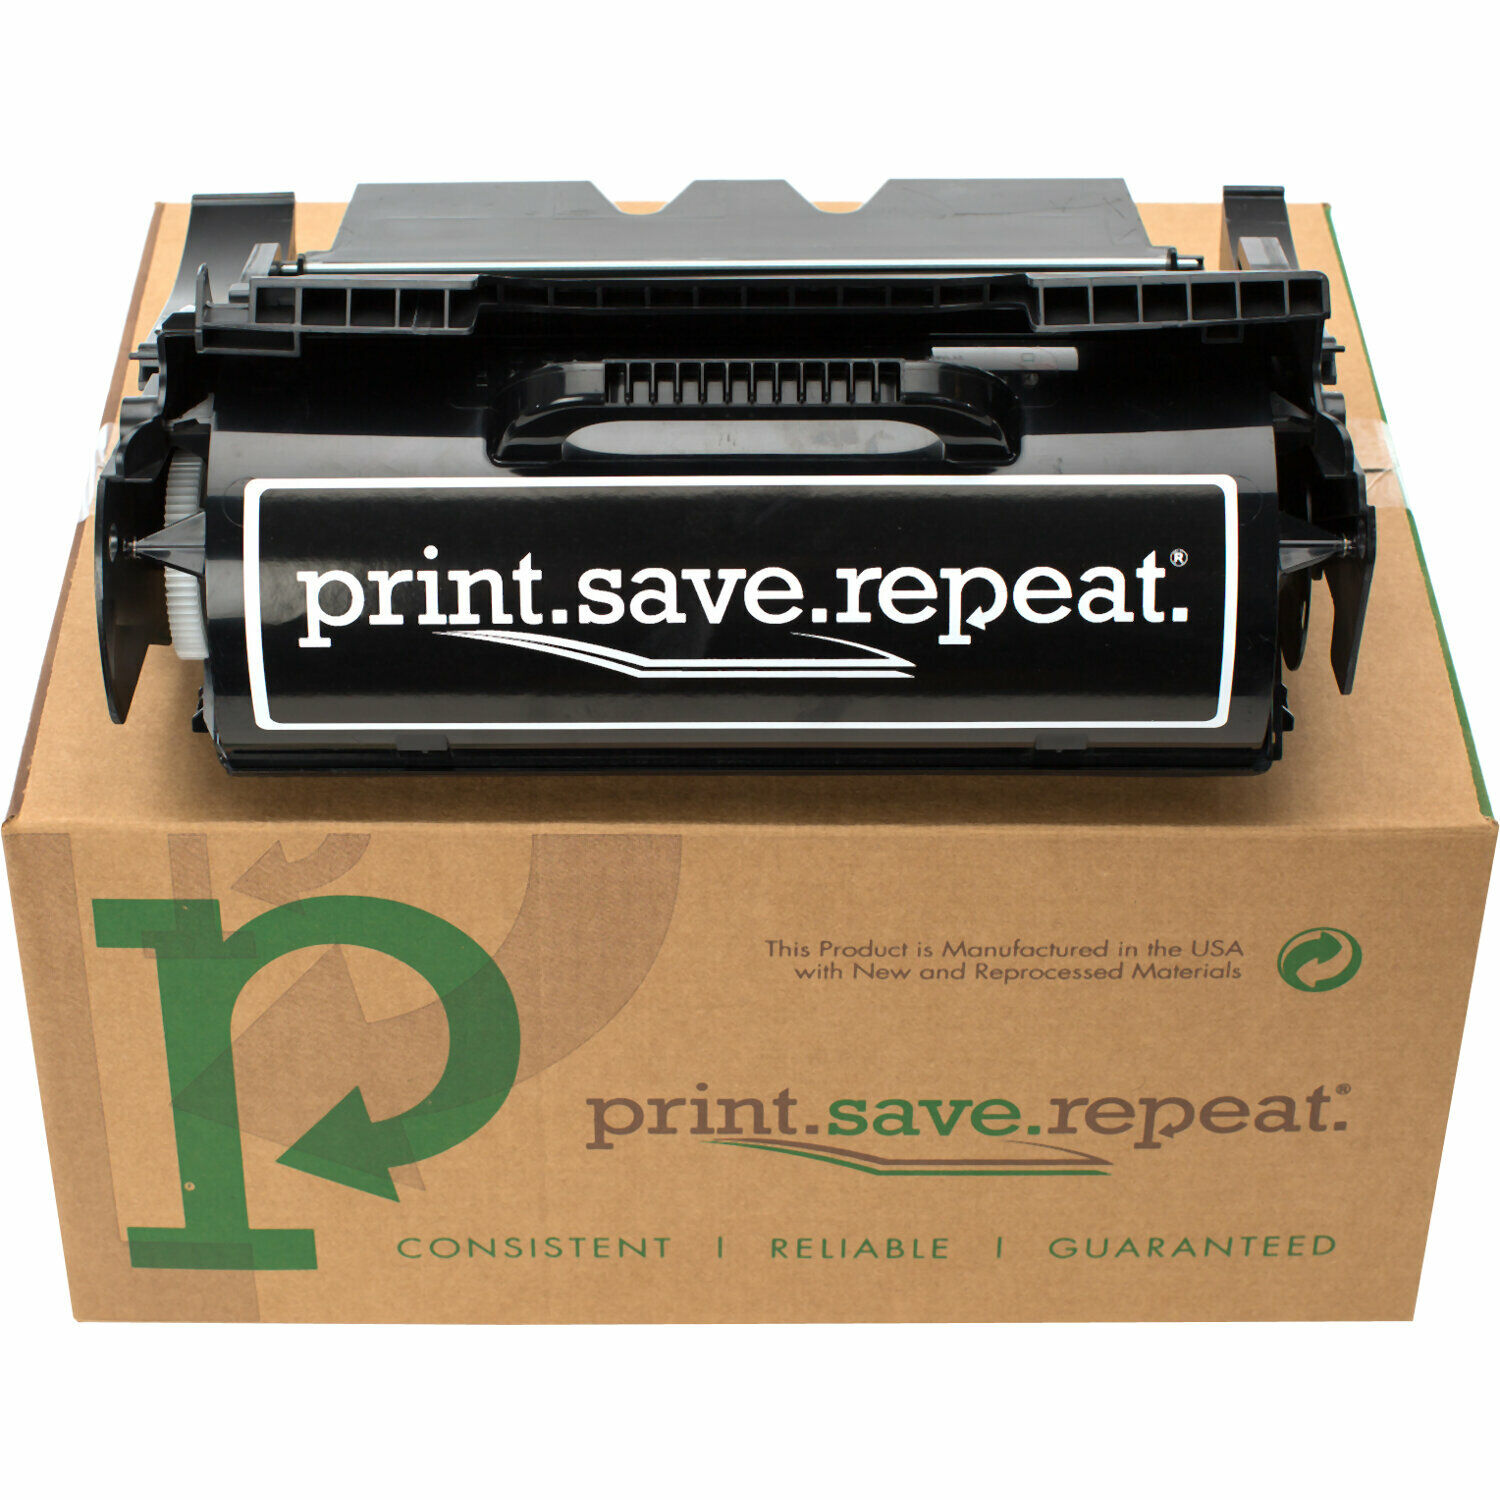 Print.Save.Repeat. Dell UD314 Toner Cartridge for 5310 [30K Pages]